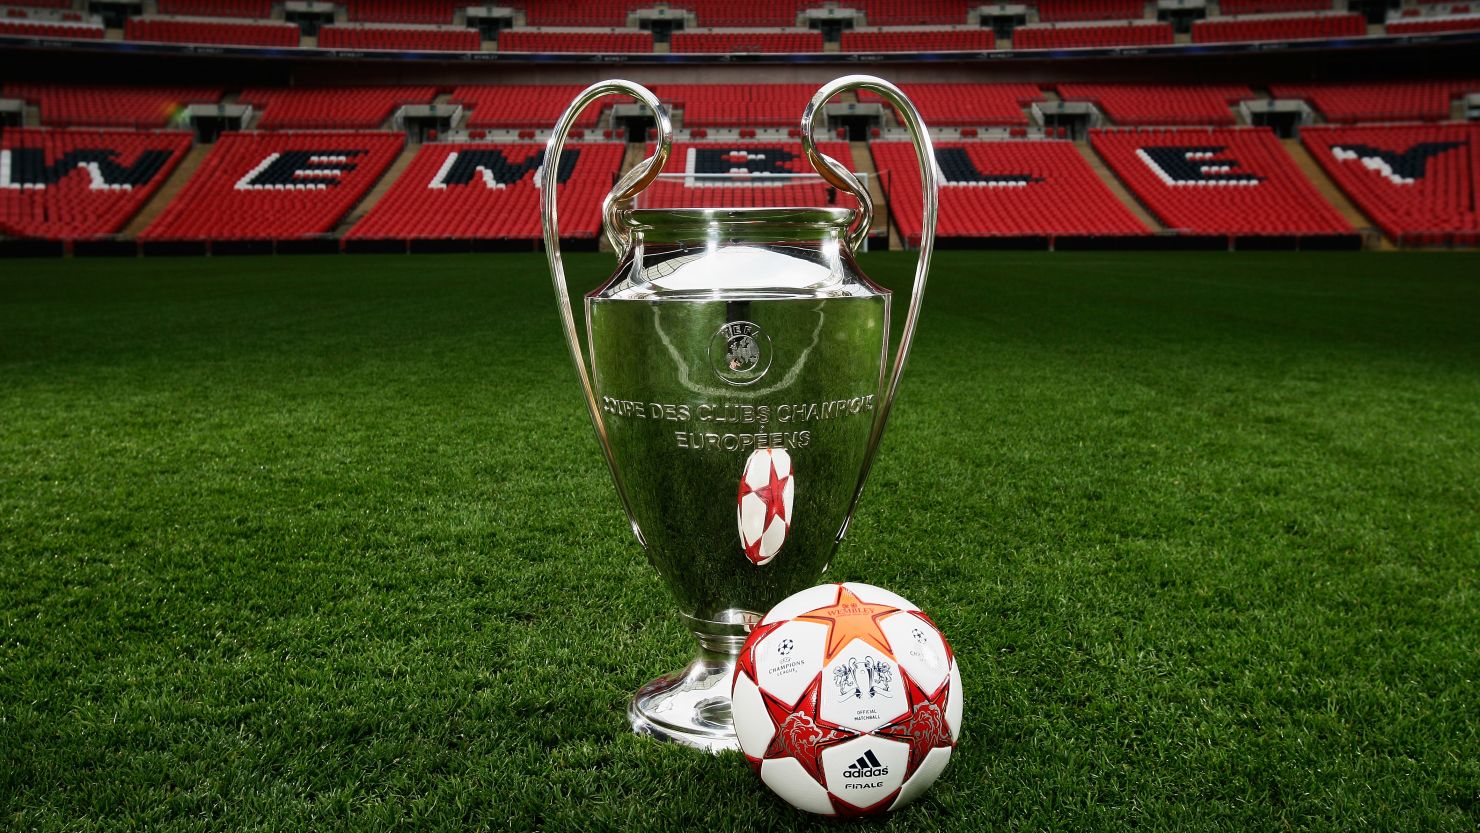 The European Champions League final was last held at London's Wembley Stadium in 2011.